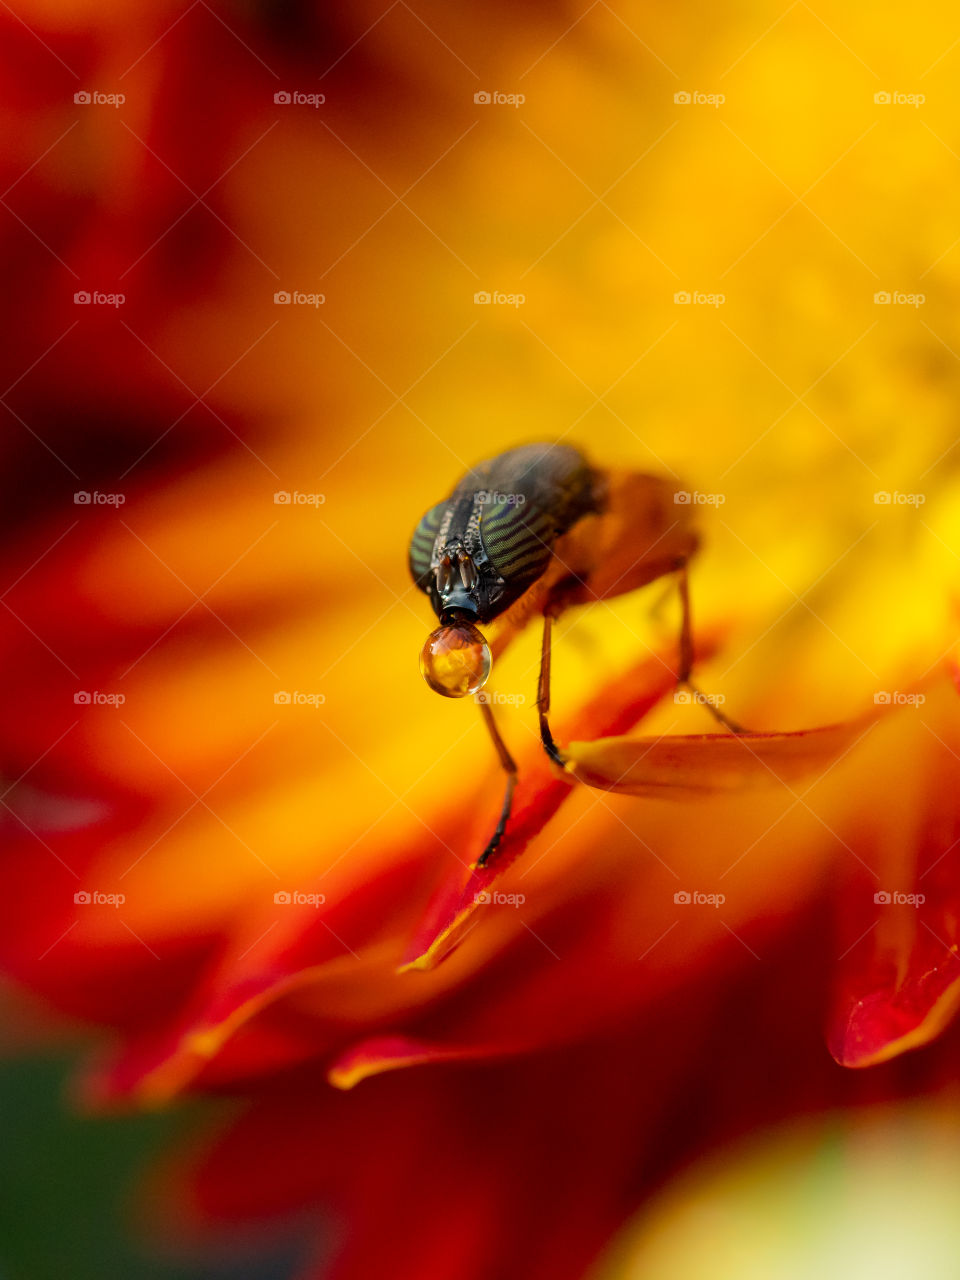 Collecting Nectar